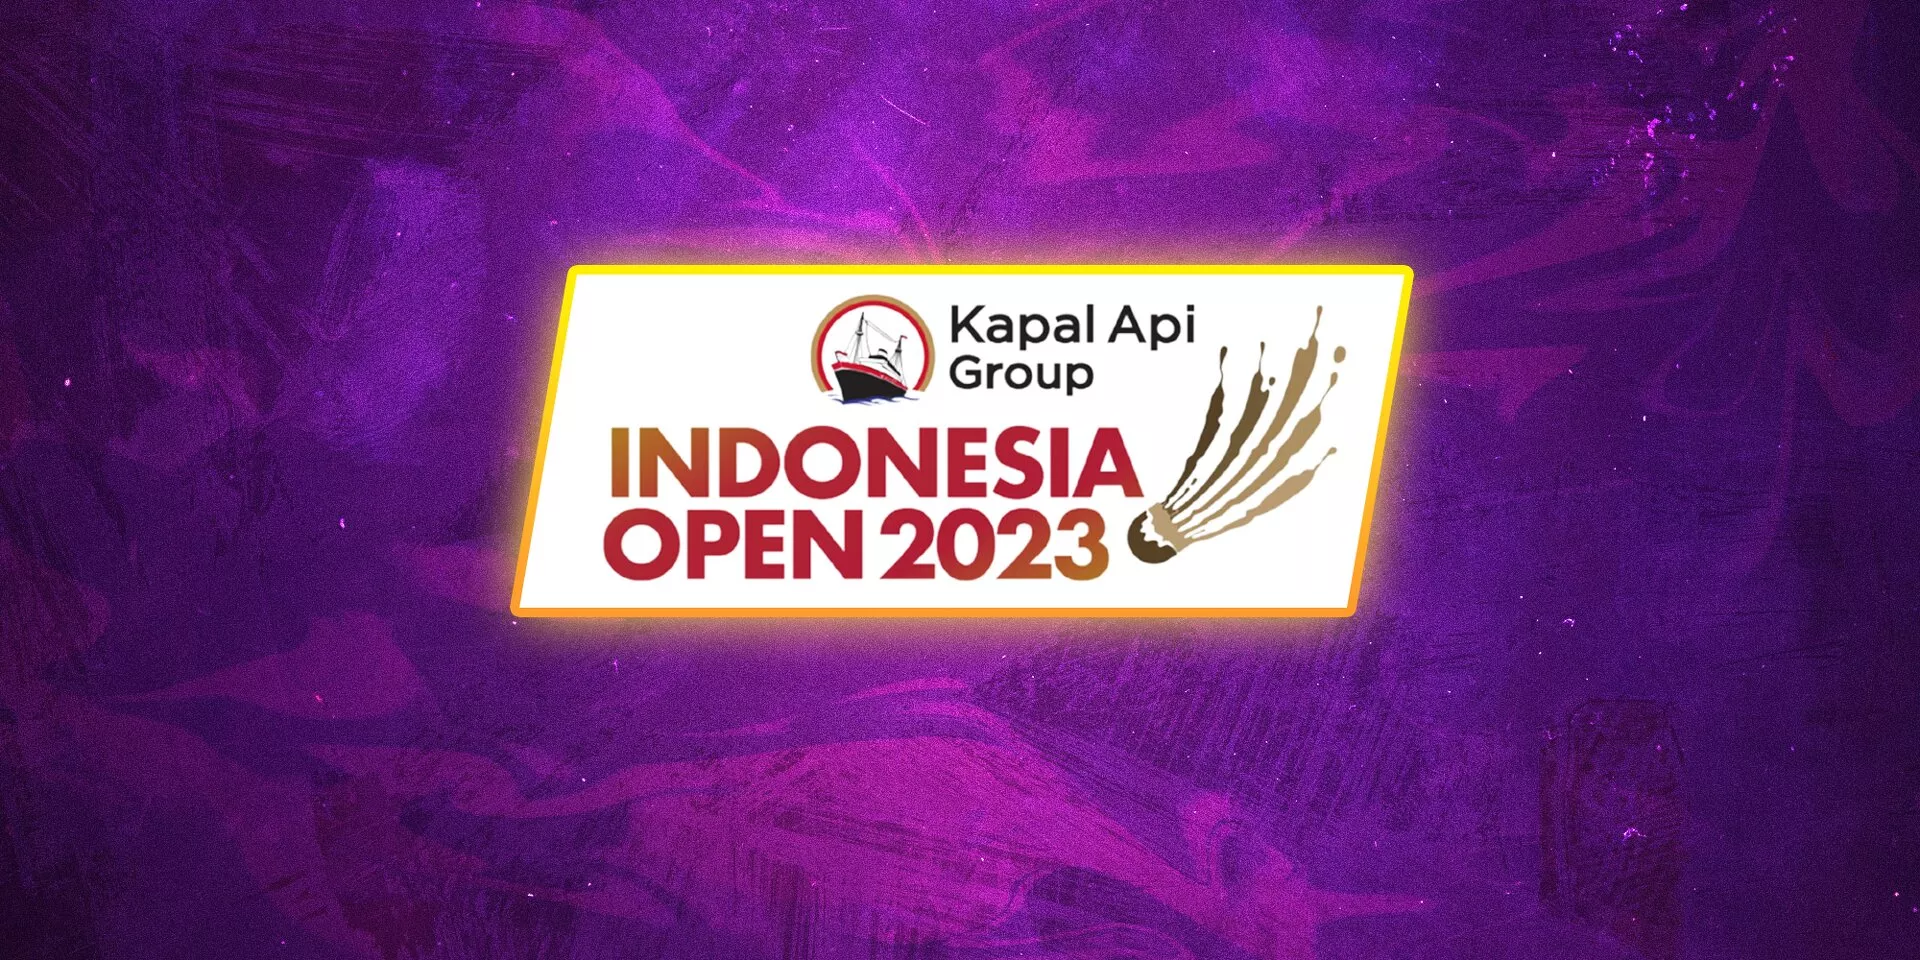 Where and how to watch Indonesia Open 2023 in Malaysia?